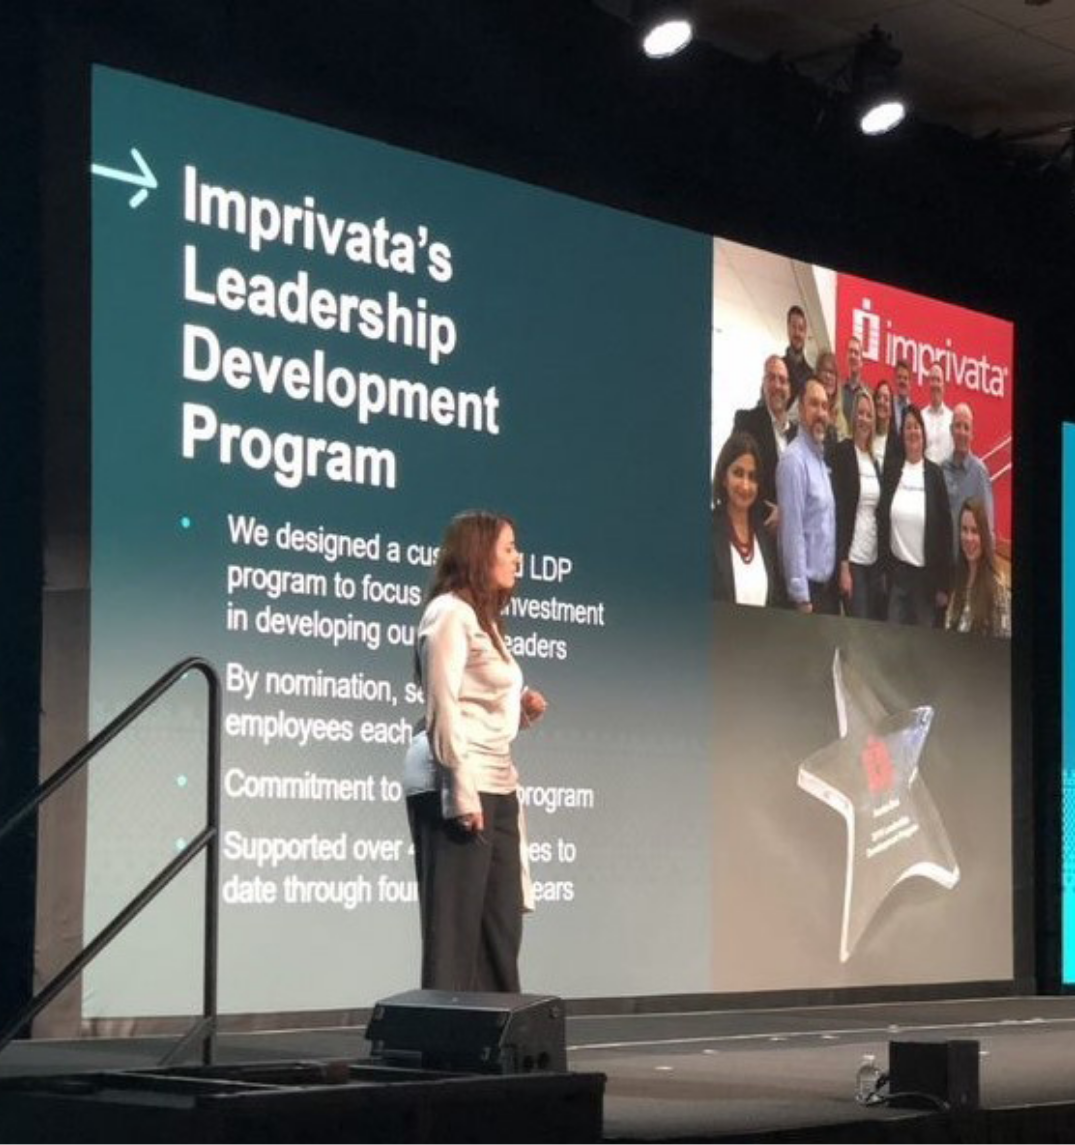 Image of an employee giving a presentation with slides on Imprivata's leadership development program behind her